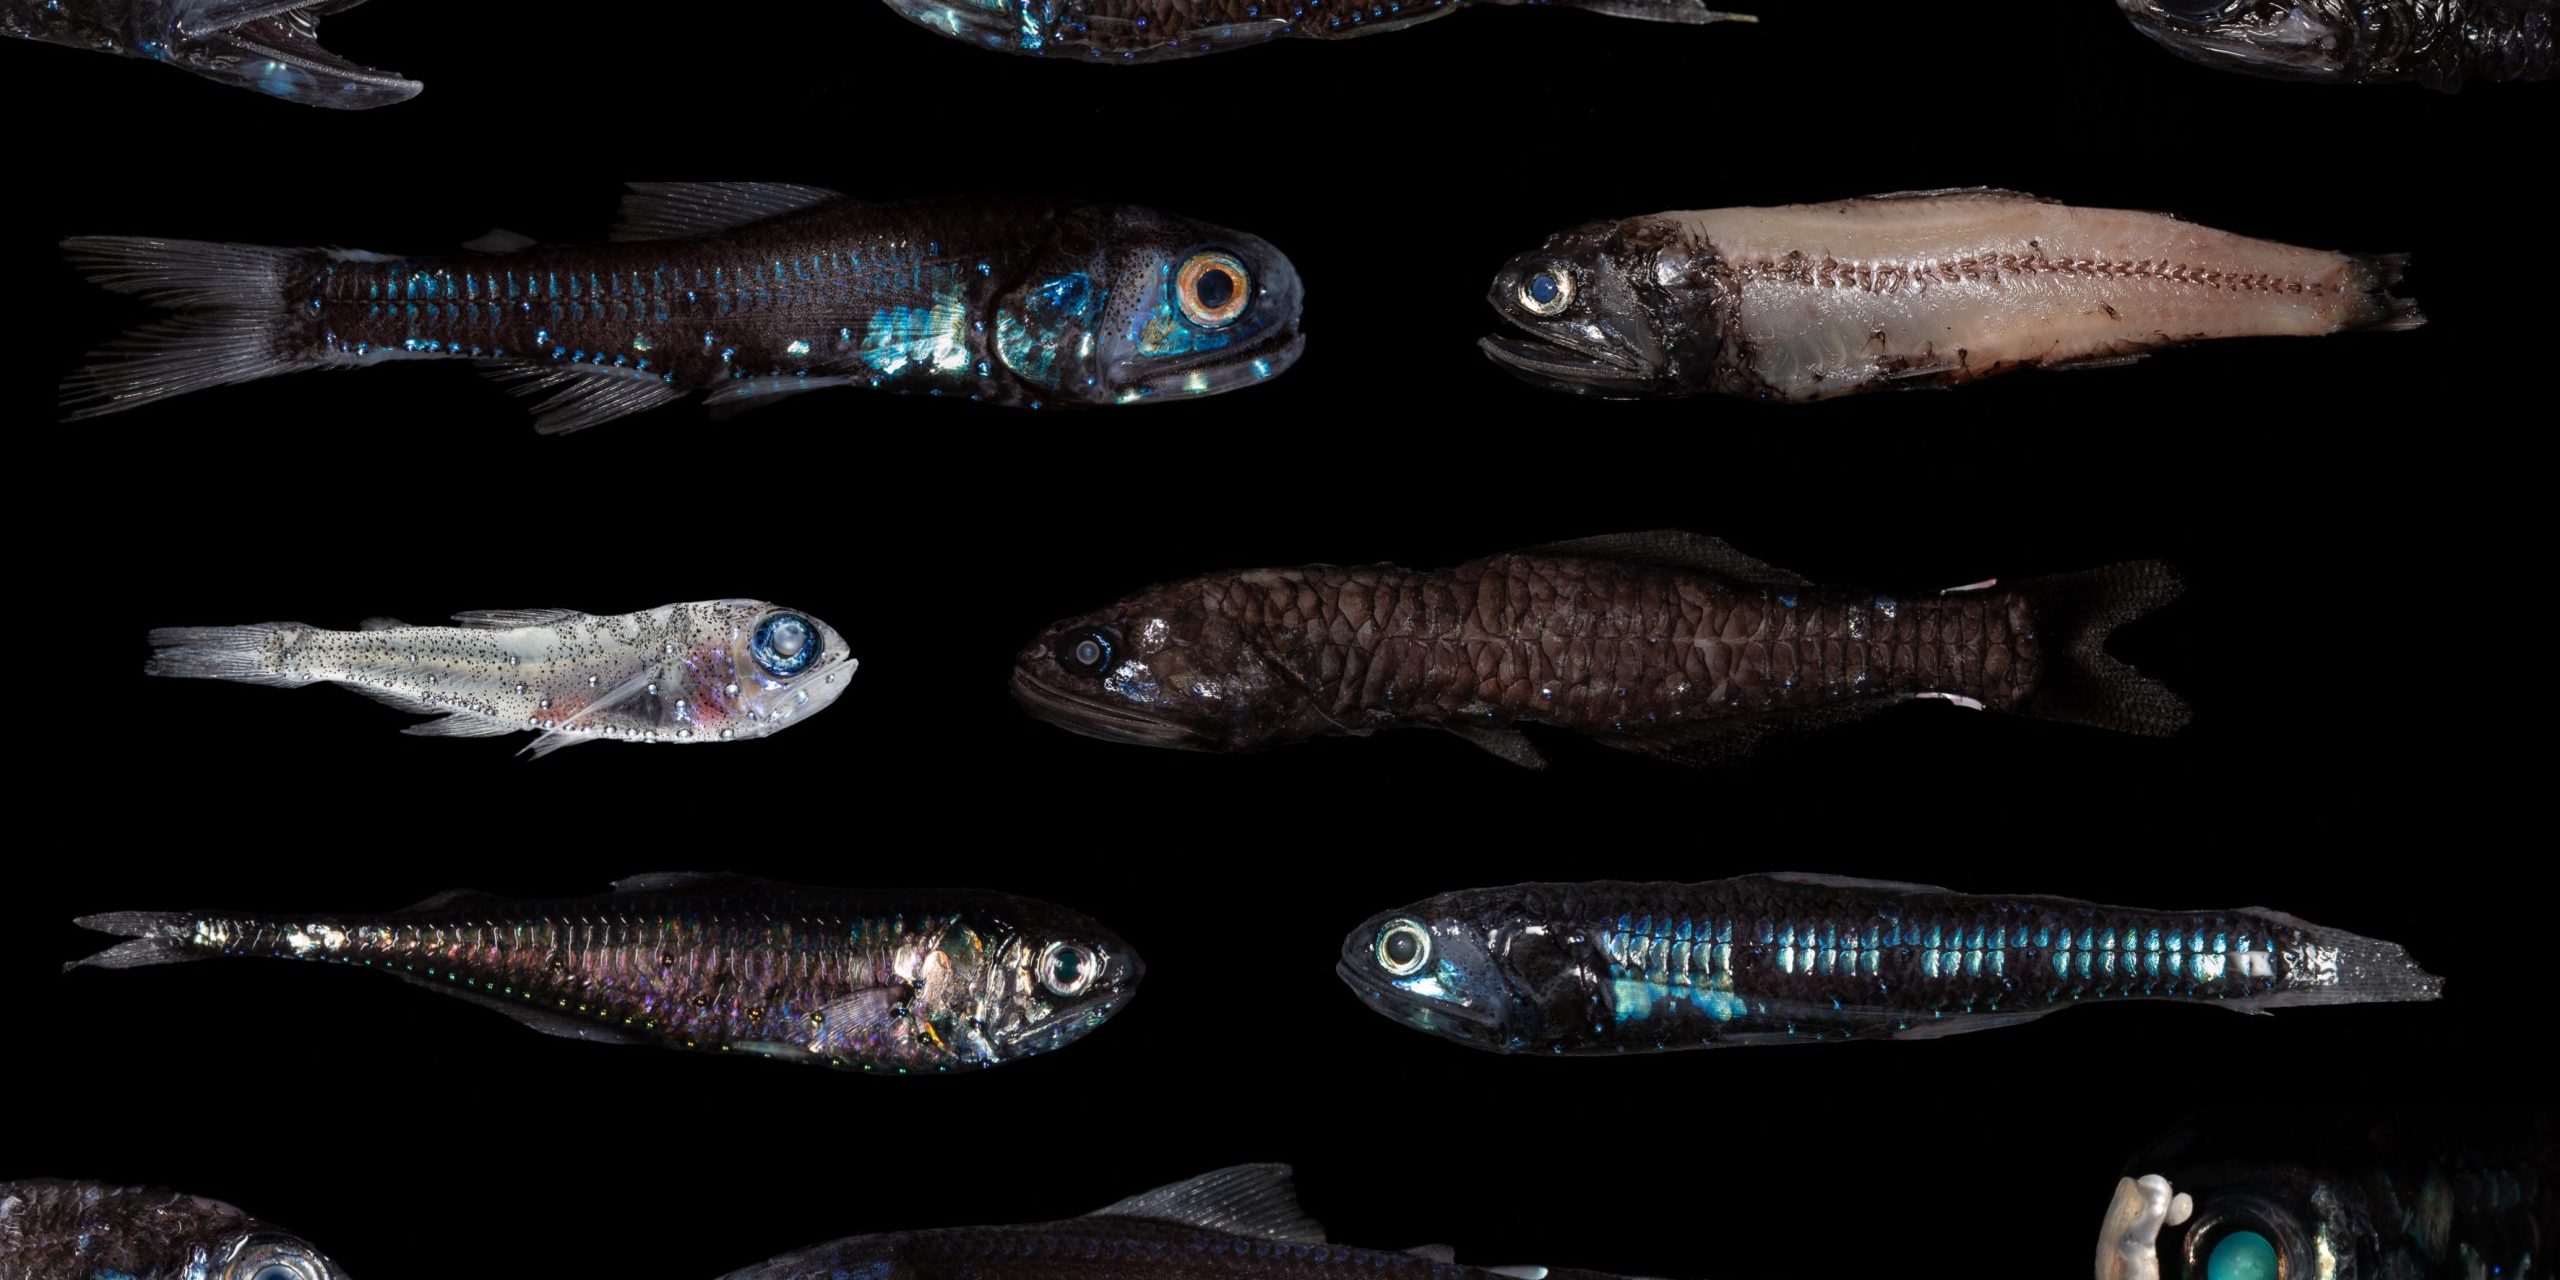 Lanterfishes come in a variety of shapes, sizes, and forms—yet all share similar types of bioluminescent organs placed throghout their bodies. Photo by Paul Caiger, ©Woods Hole Oceanographic Institution